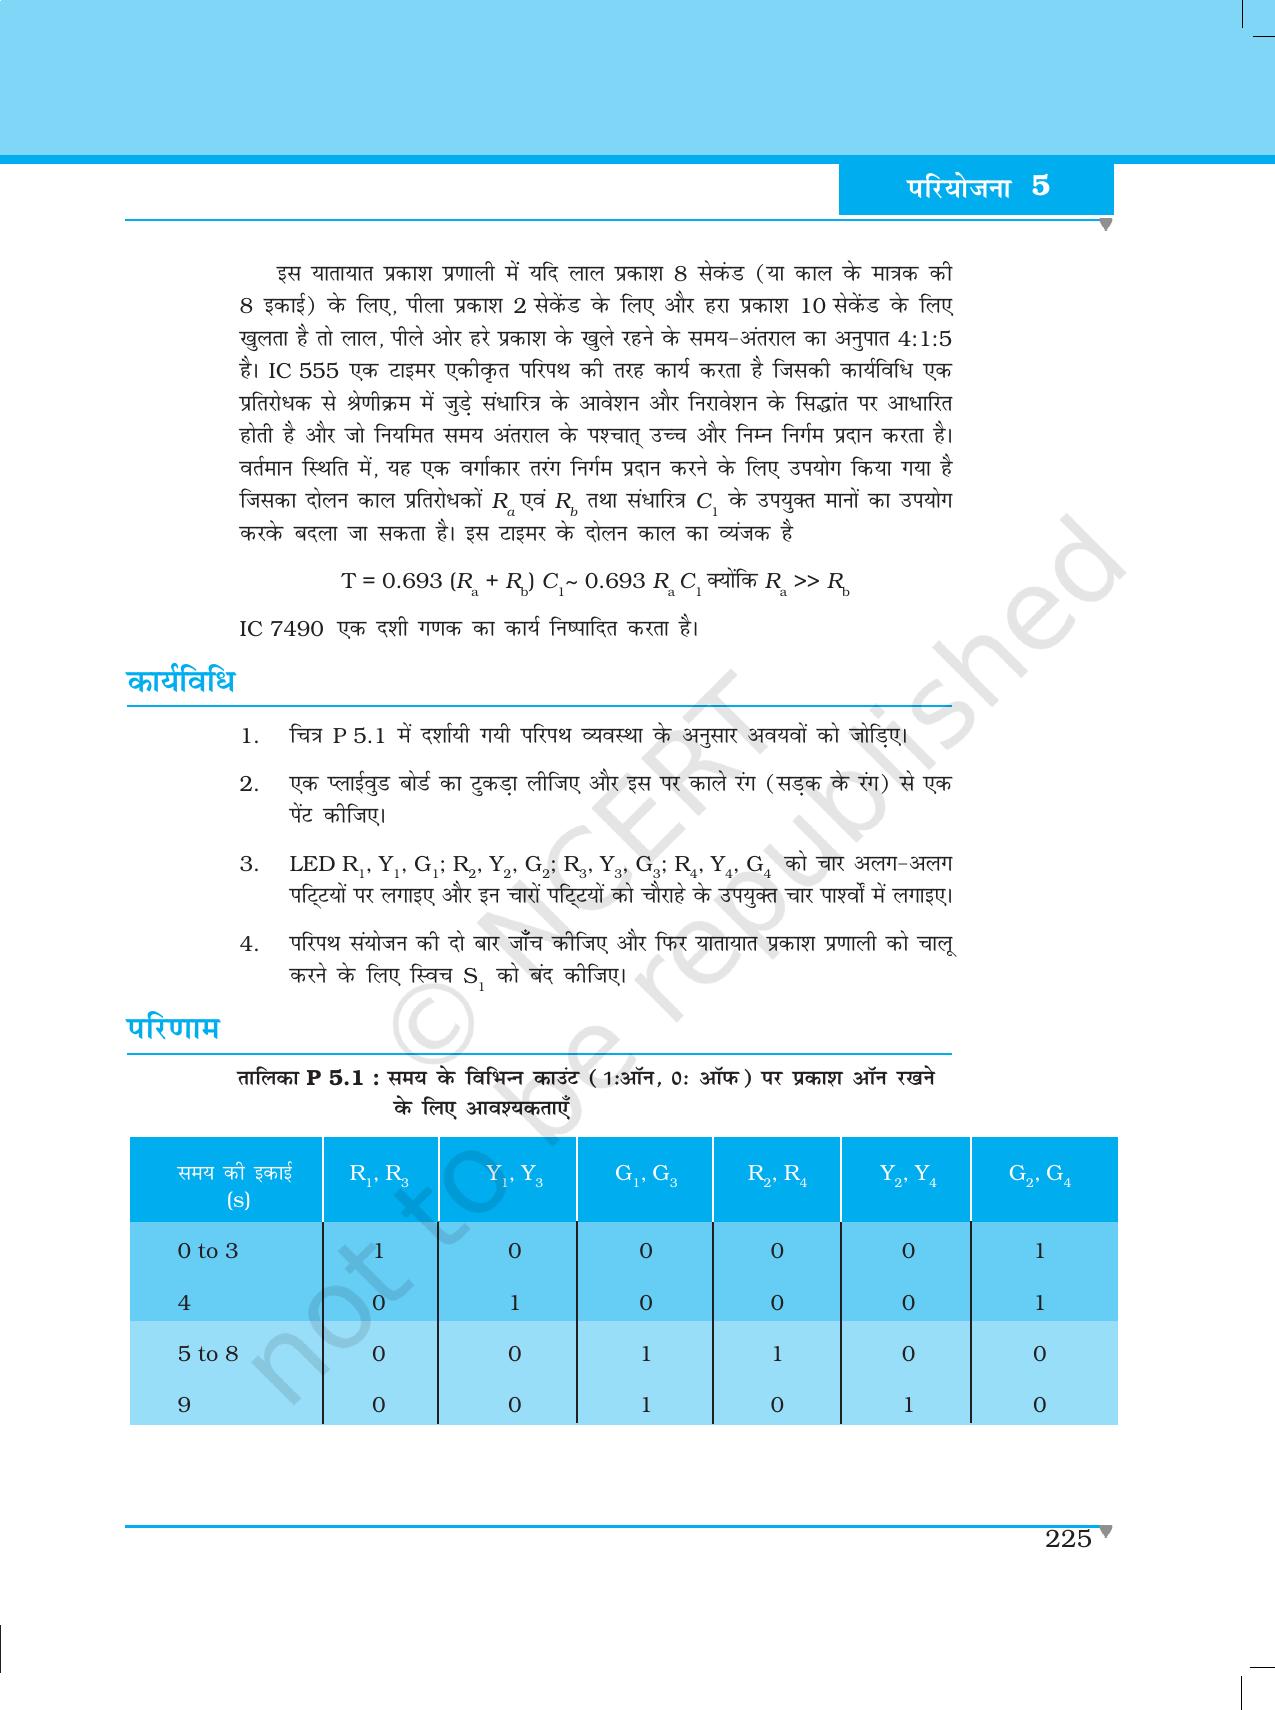 NCERT Laboratory Manuals for Class XII भौतिकी - परियोजना (1 - 7) - Page 19